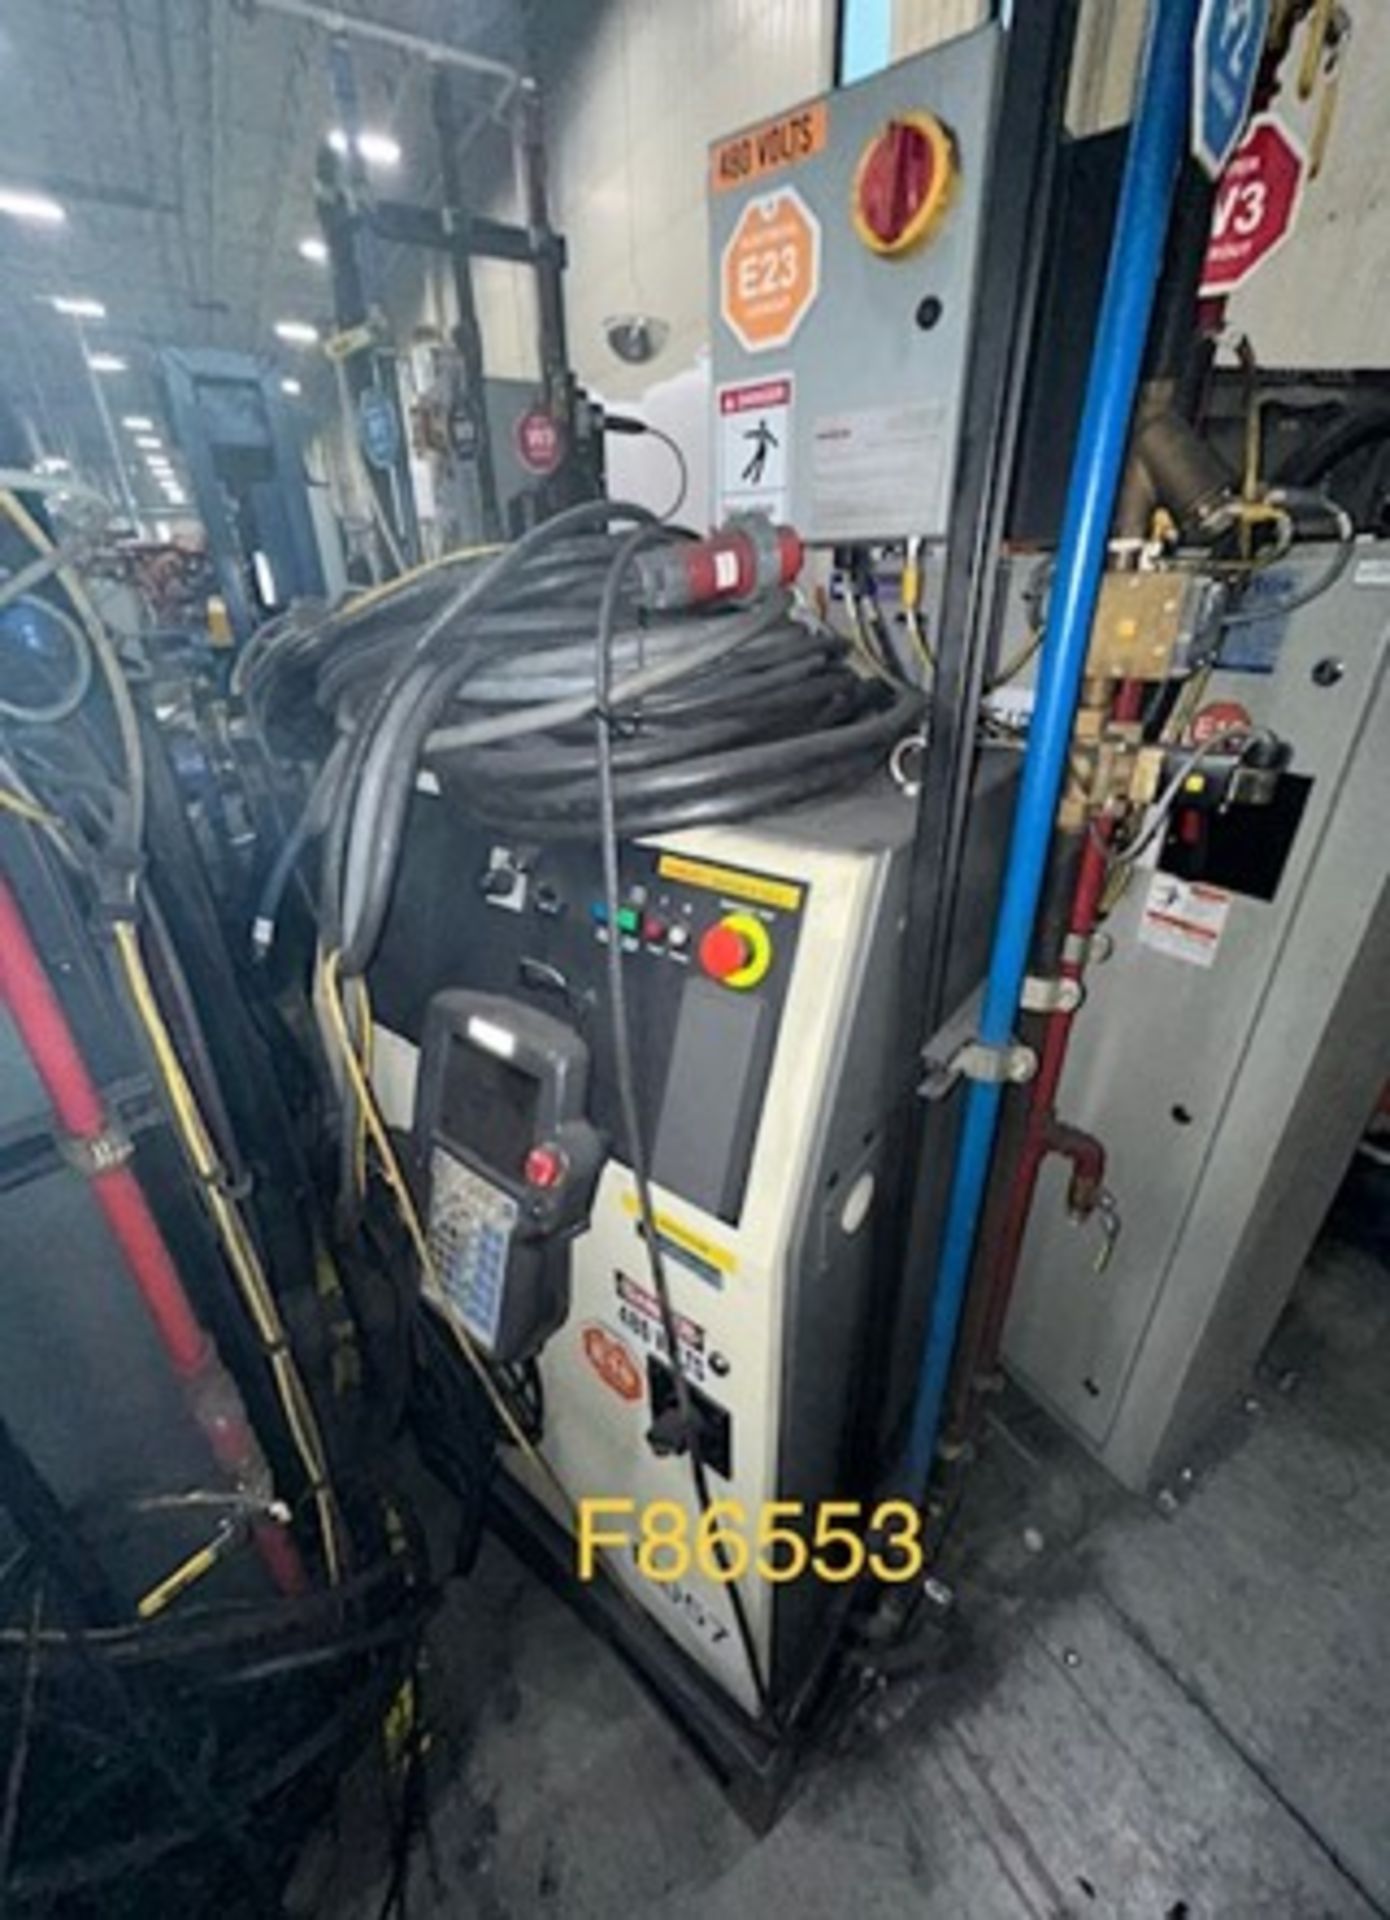 FANUC ROBOT R2000IB/210F WITH R-J3IC CONTROLS, CABLES AND TEACH PENDANT, YEAR 2007, SN F86553 - Image 5 of 6